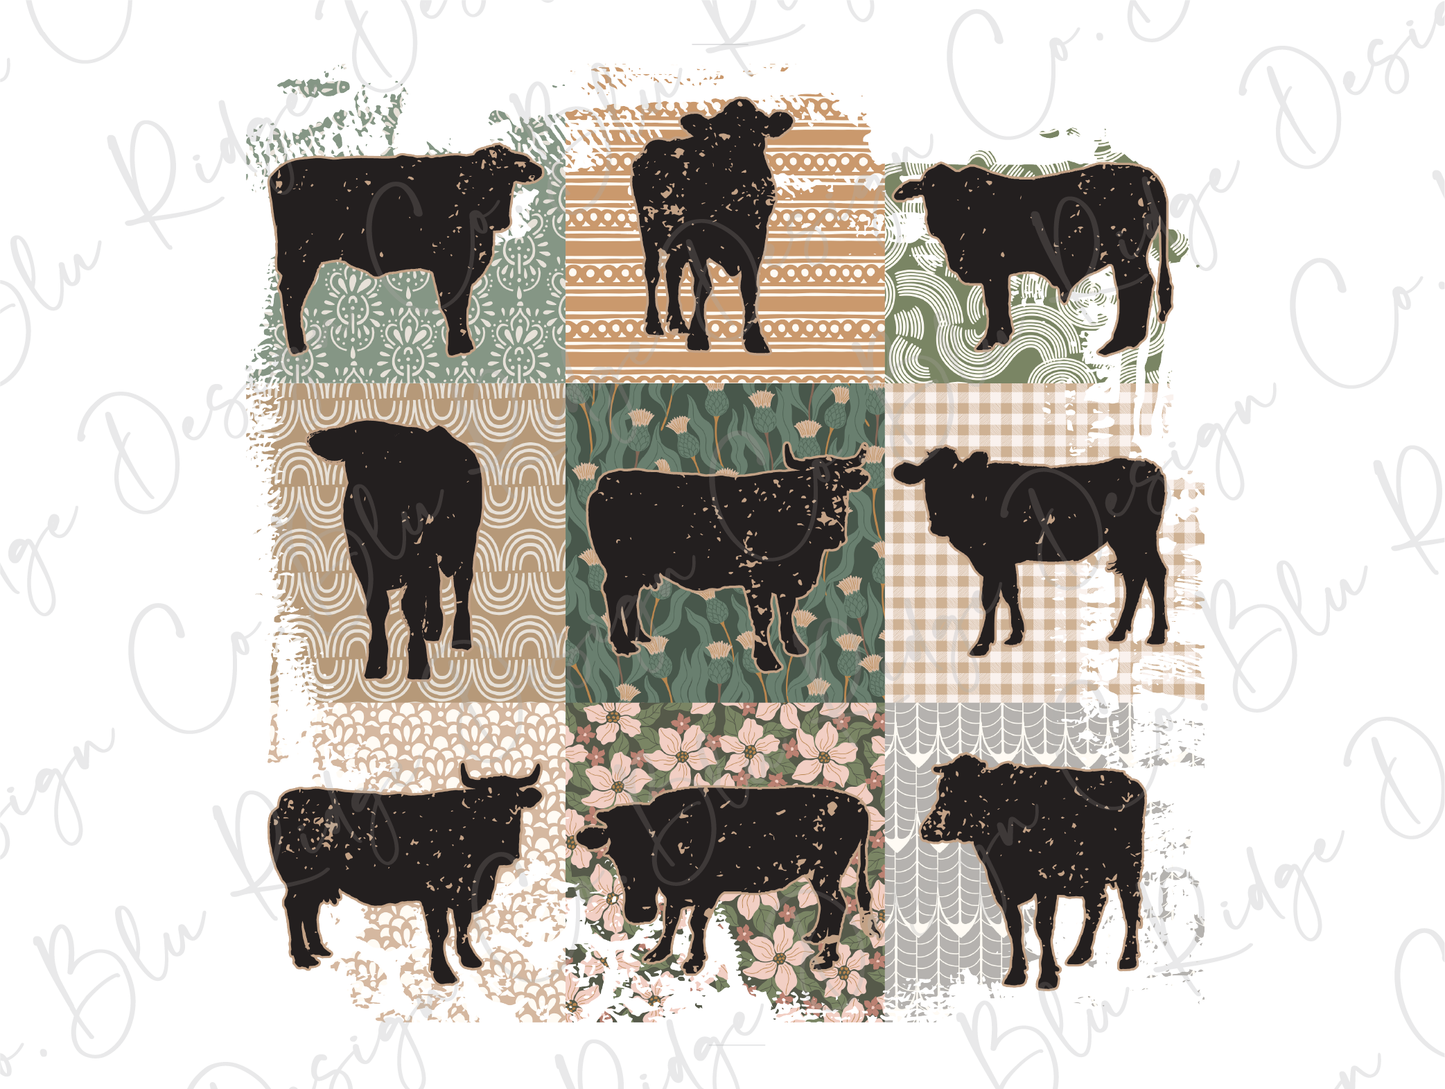 a picture of some cows in a patchwork pattern